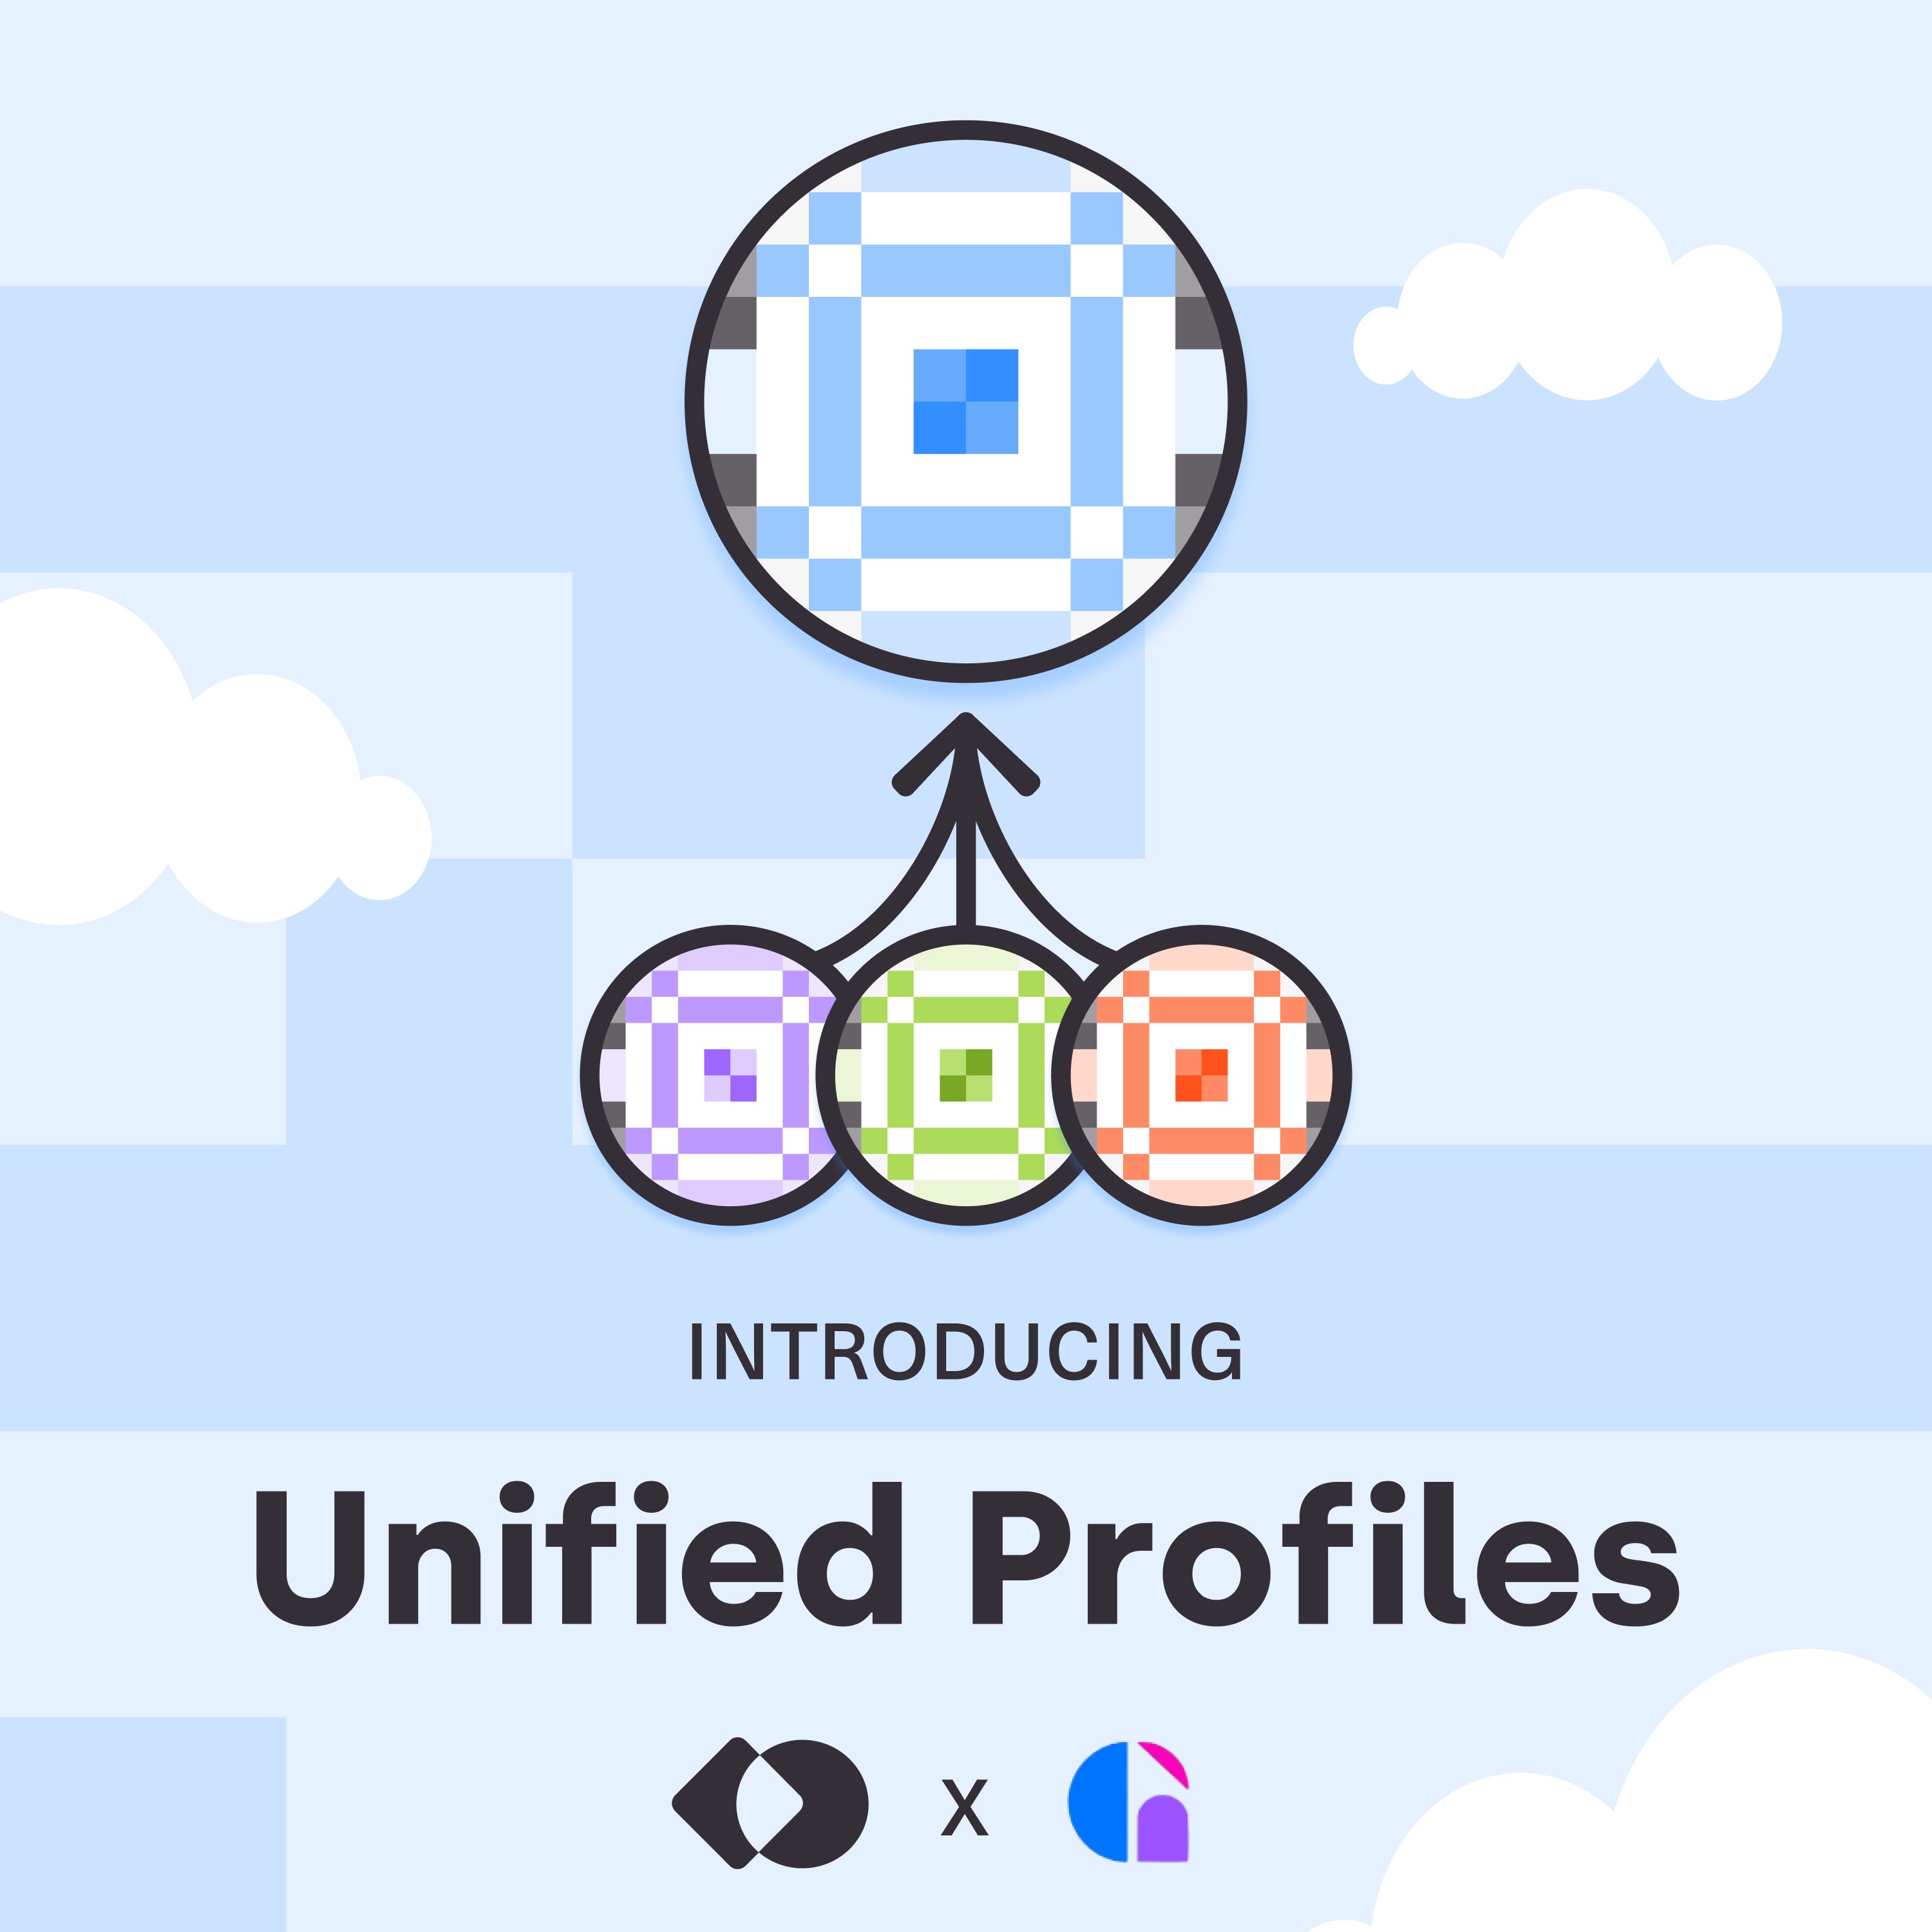 Unified Profiles